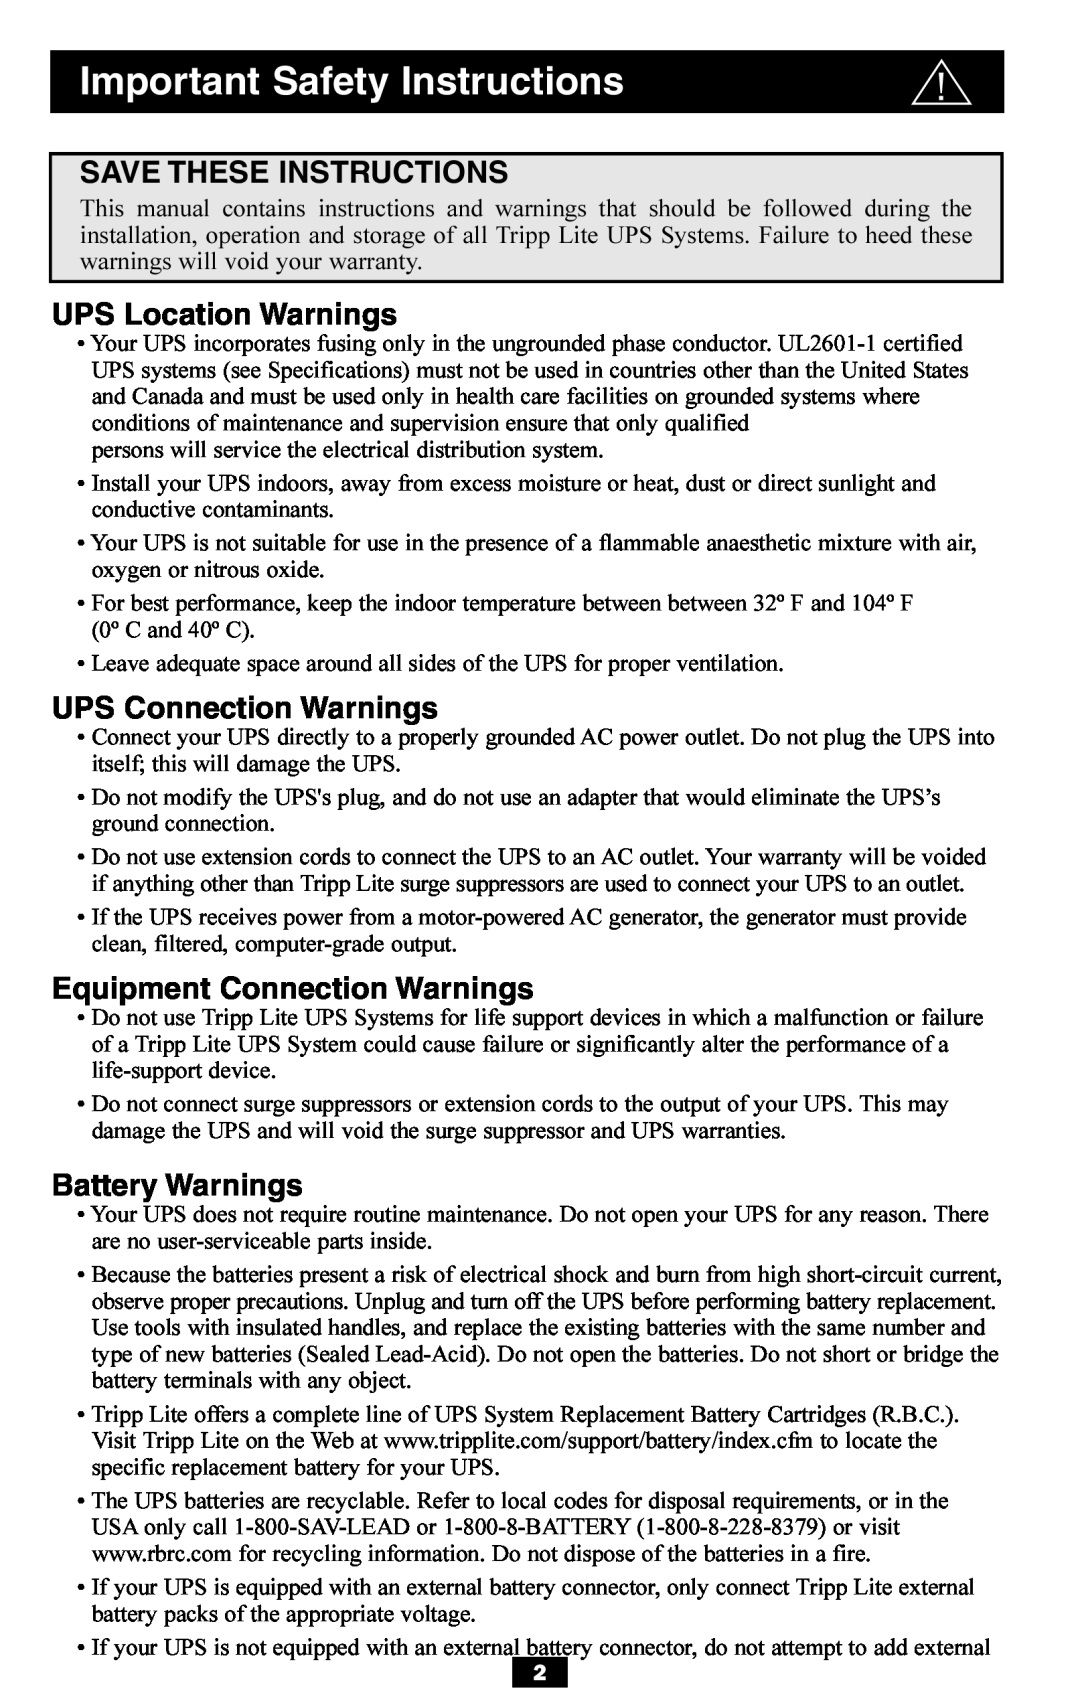 Tripp Lite SMART700HG, BP36V27 Save These Instructions, UPS Location Warnings, UPS Connection Warnings, Battery Warnings 